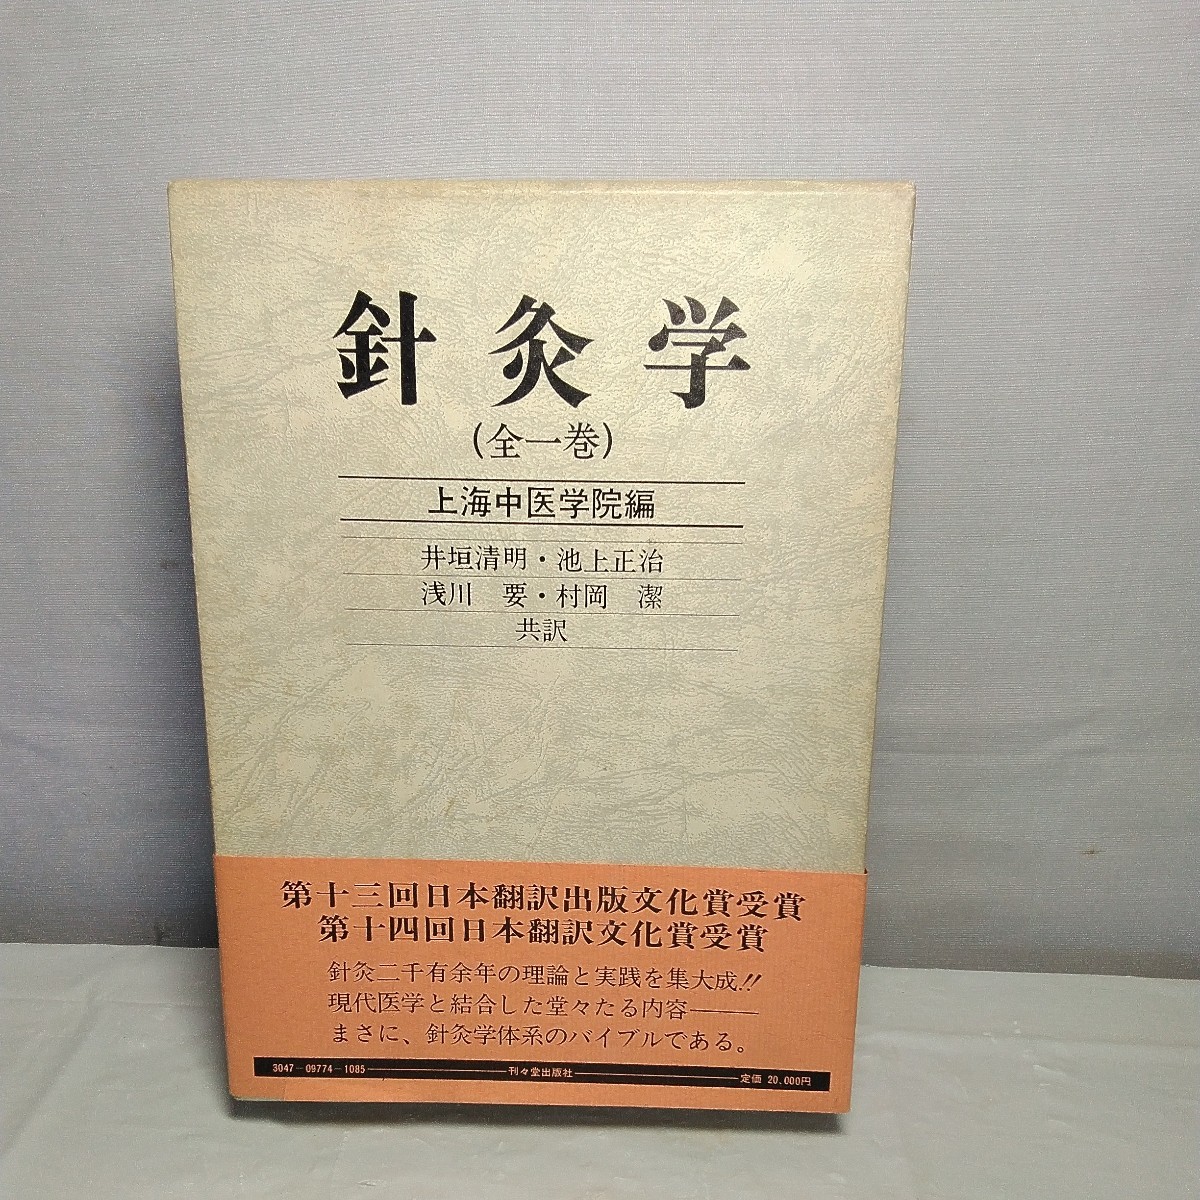  needle moxibustion . all one volume on sea middle medicine . compilation ... publish company boxed large book@ Oriental medicine medical care therapia 